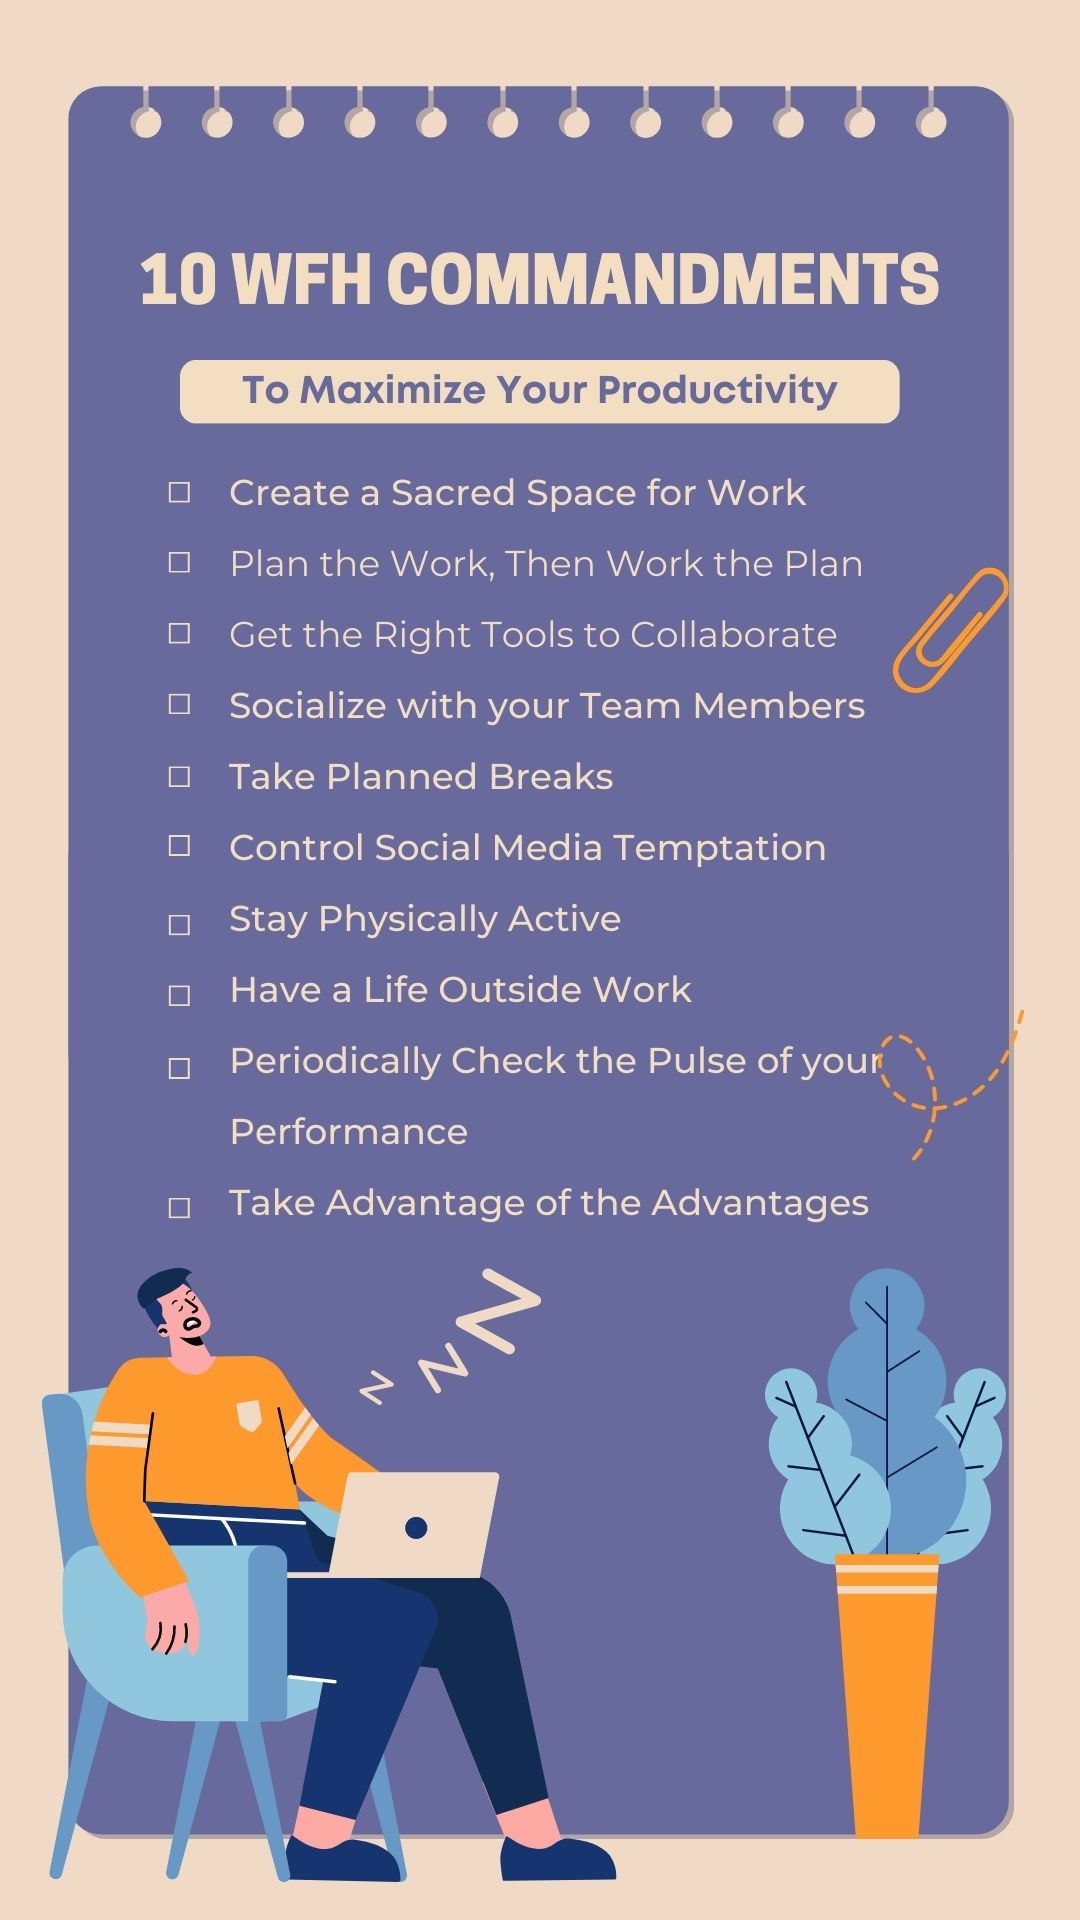 10 commandments for working from home